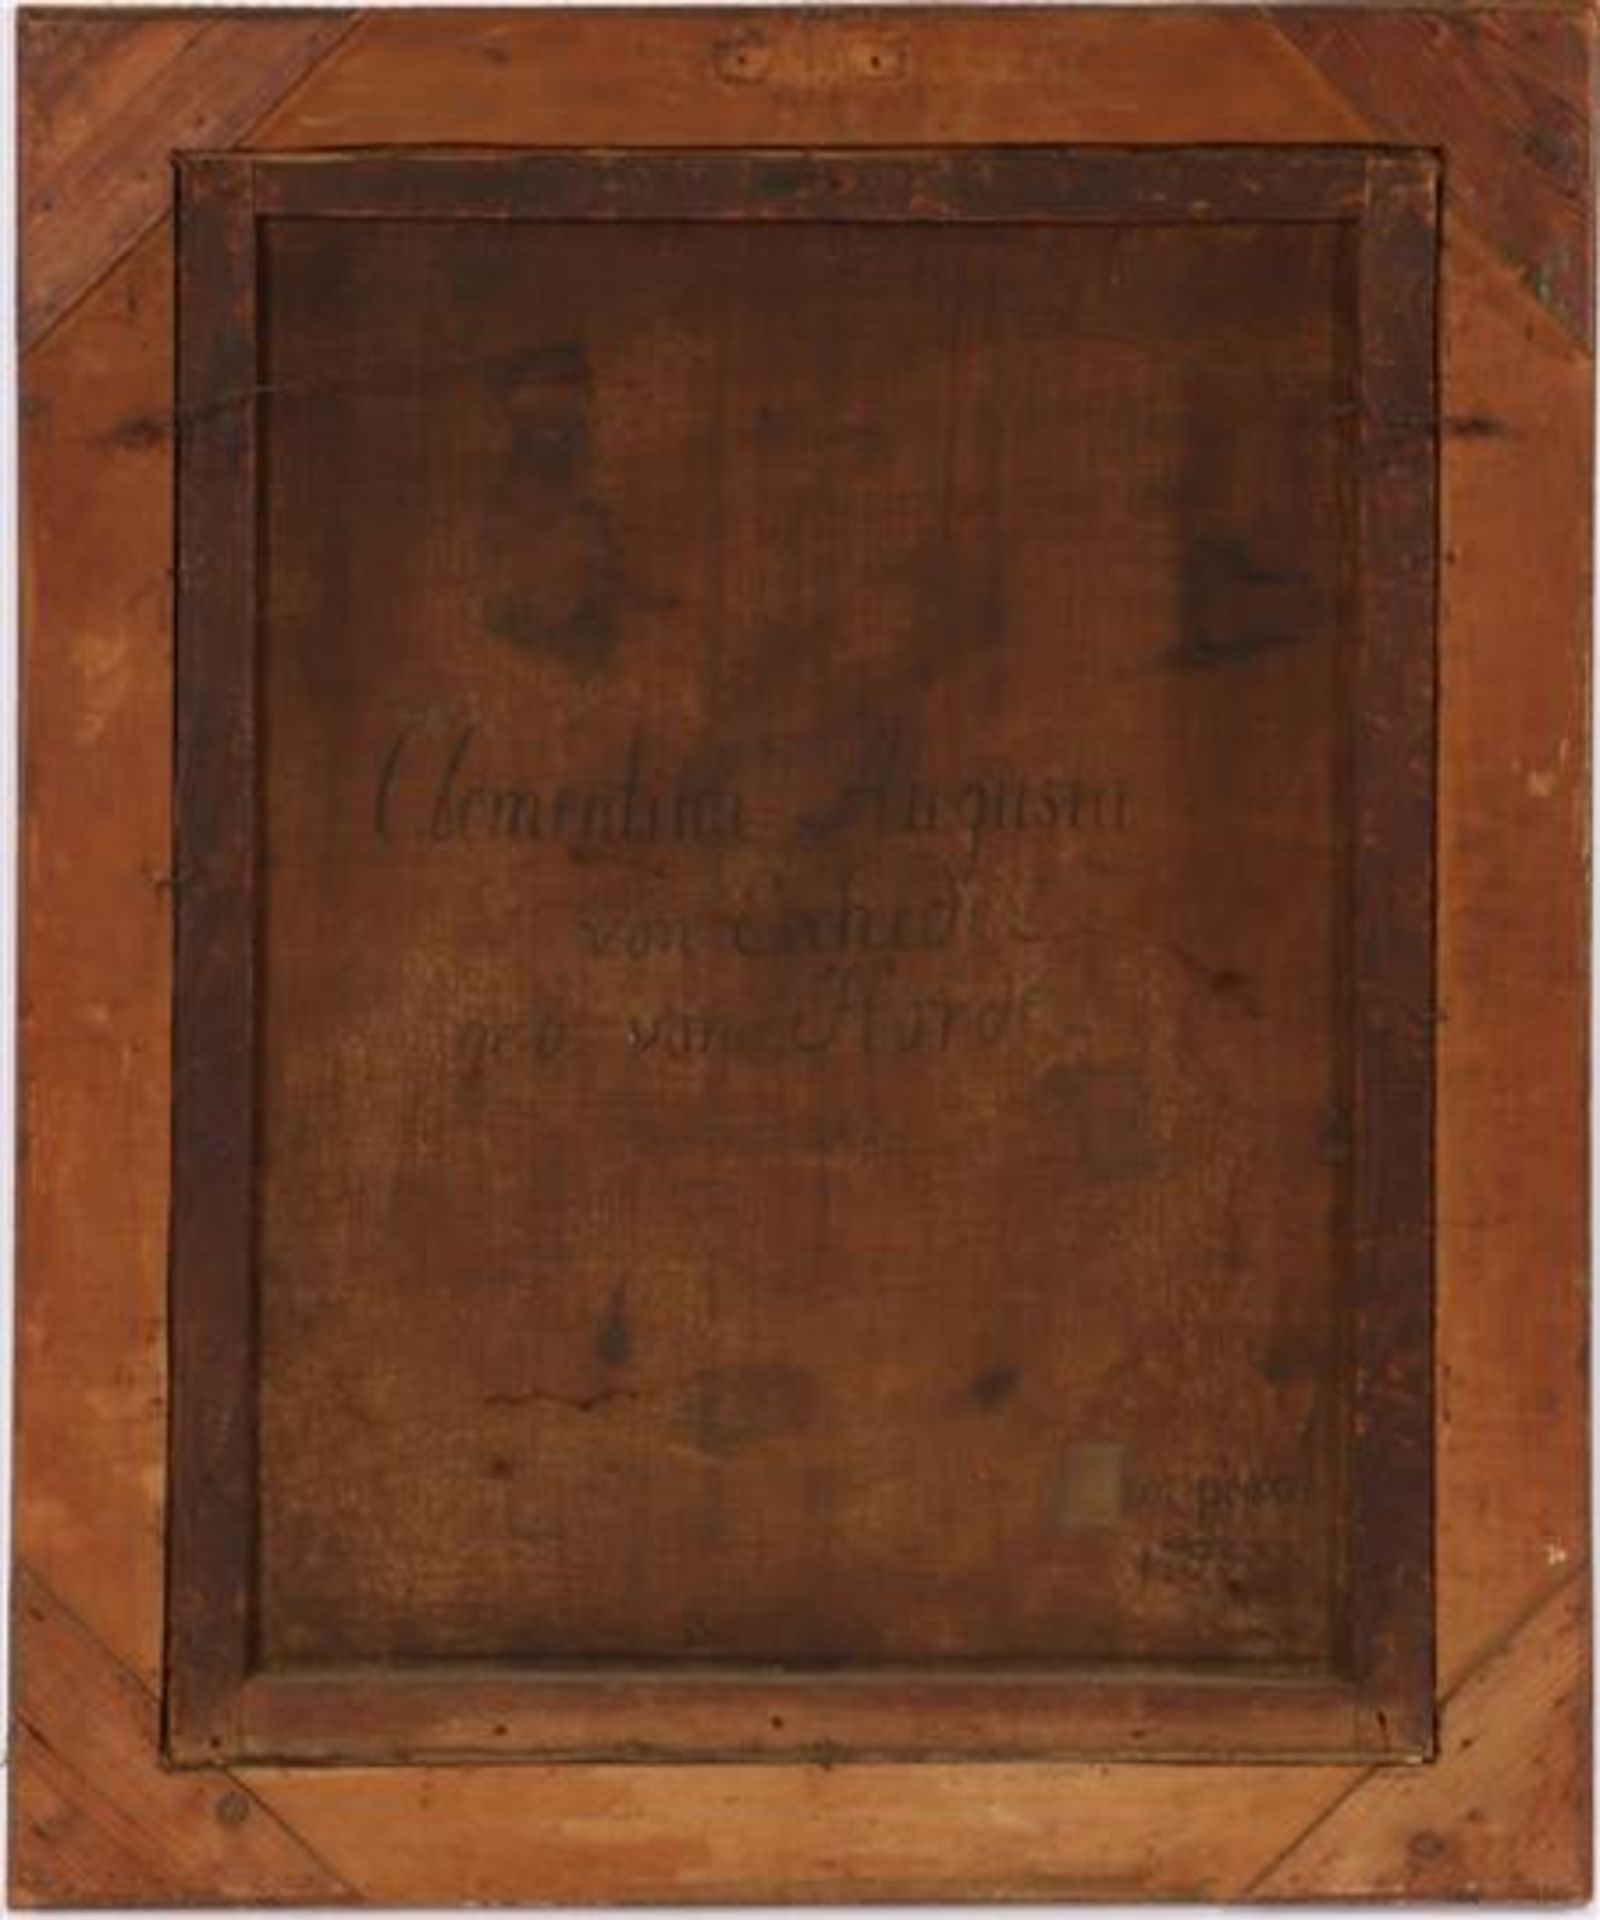 Anonymous, portrait of a lady, back of note Clementina Augusta von Eschede ge. von Hörde, 1793, - Image 4 of 4